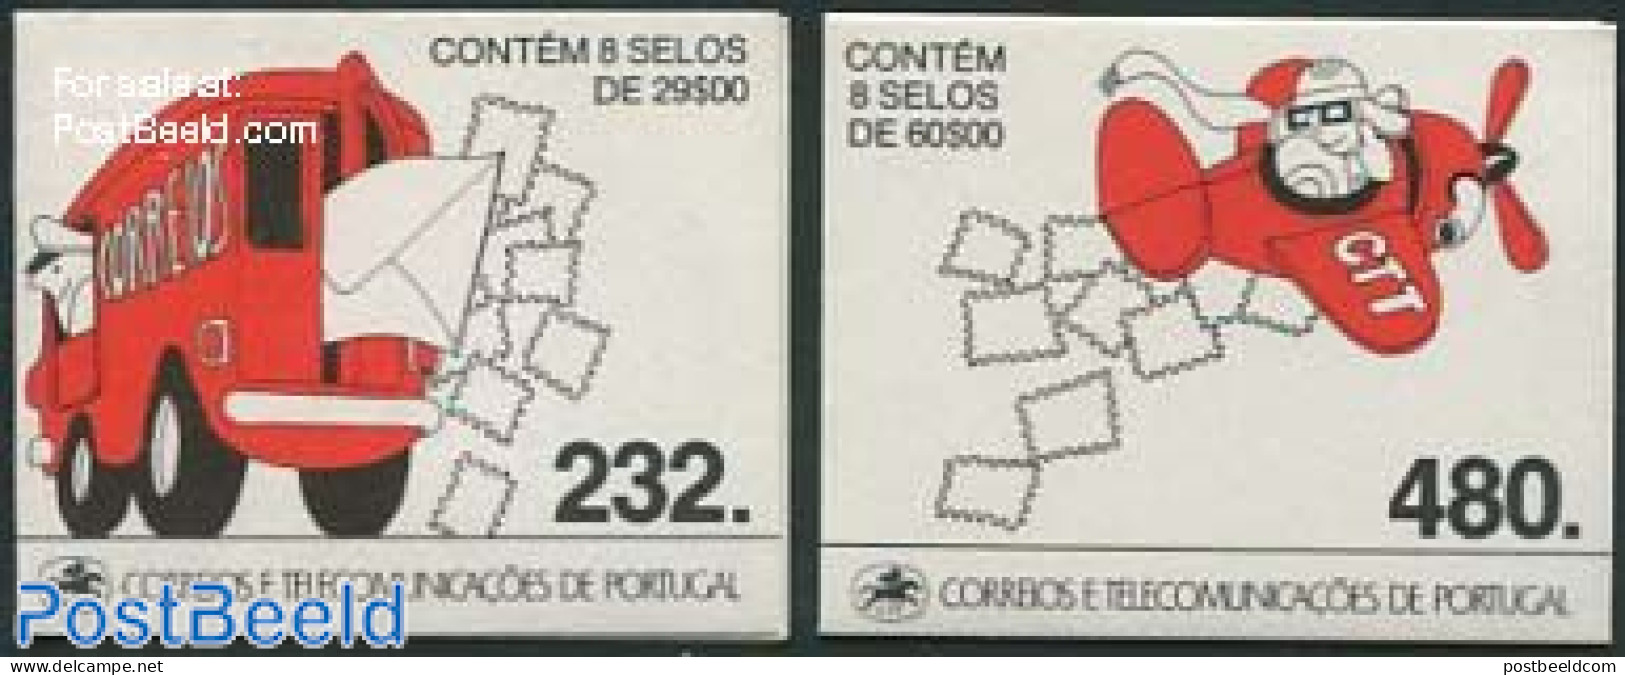 Portugal 1989 Greetings 2 Booklets, Mint NH, Post - Stamp Booklets - Unused Stamps